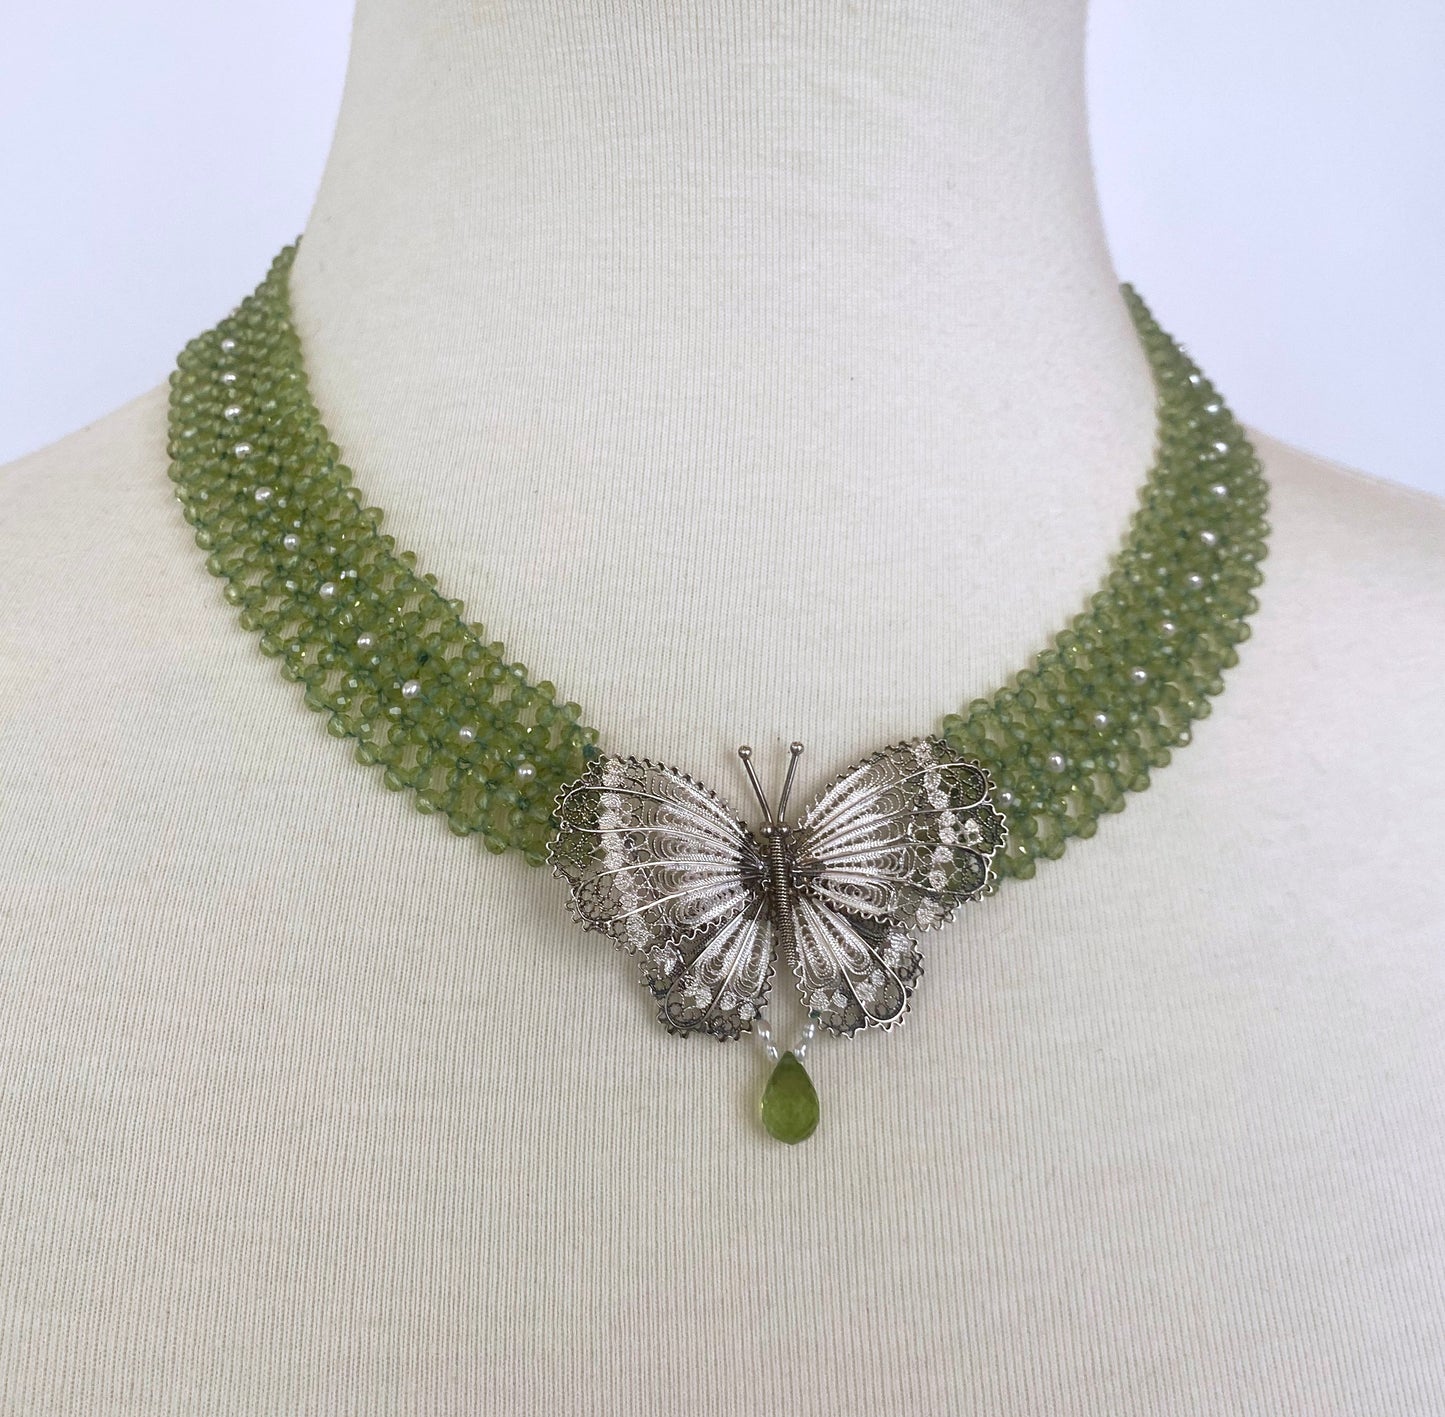 Peridot and Pearl Necklace with Vintage Silver Brooch Centerpiece